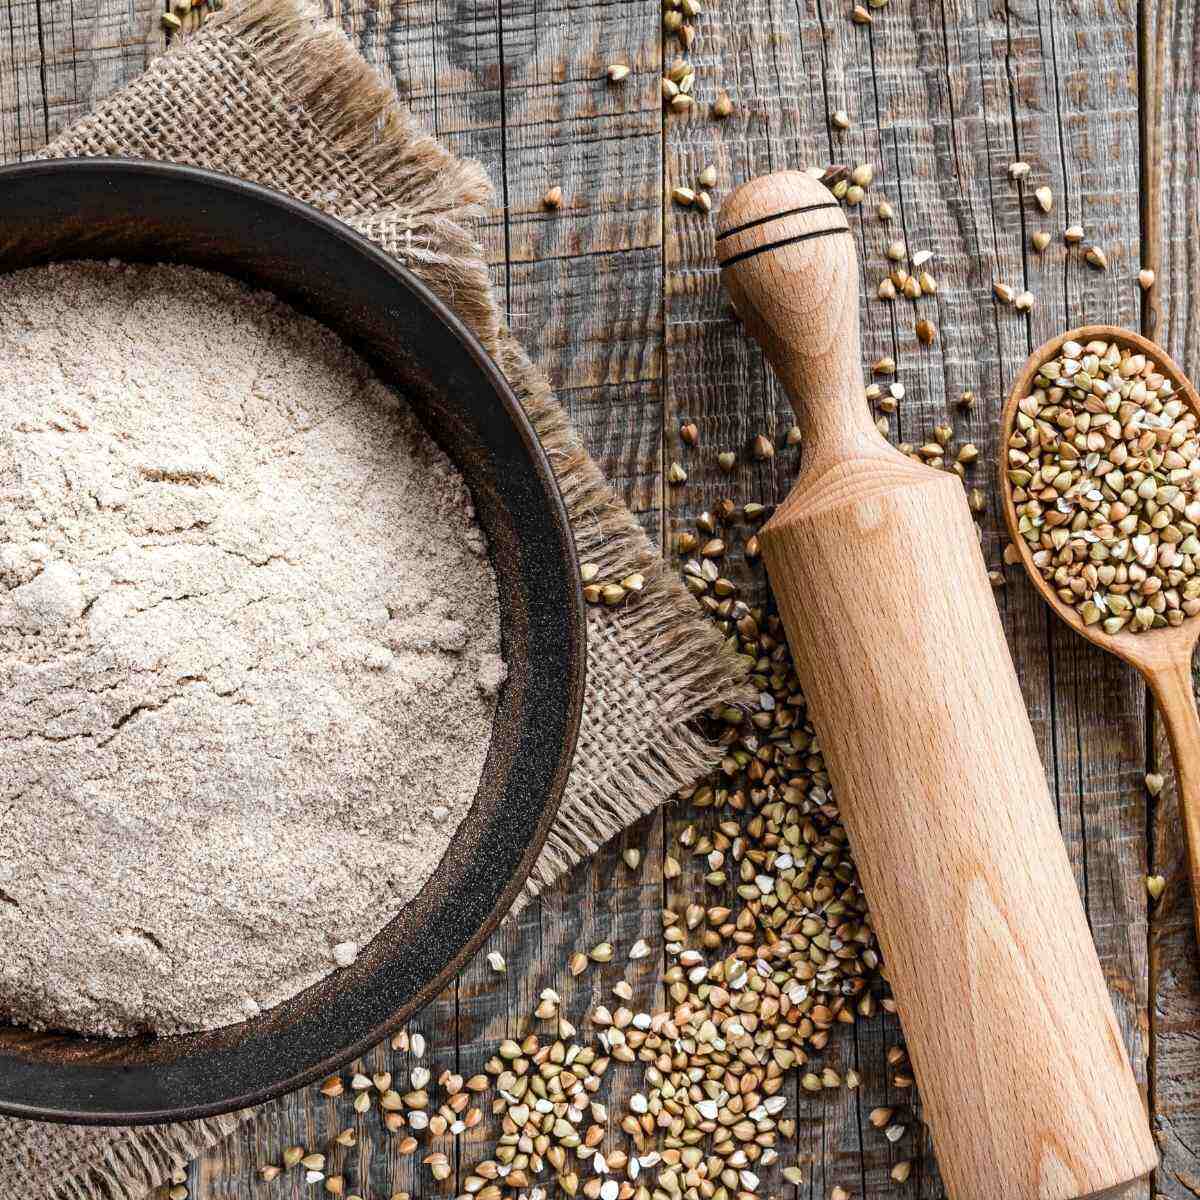 Buckwheat flour placed in a bowl with some groats spilled around it and a rolling pin next to the bowl.